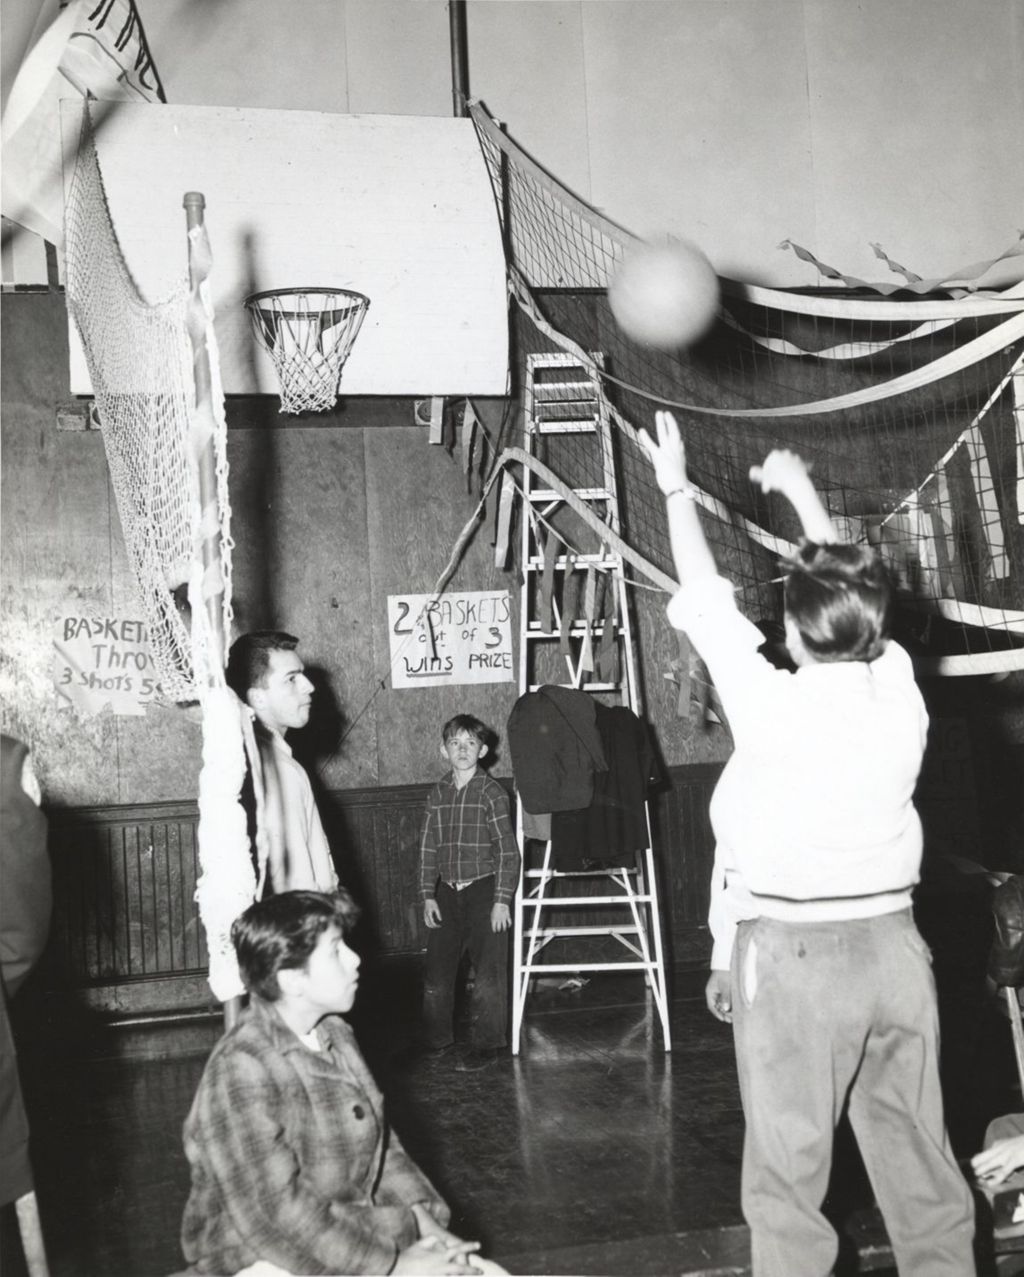 Miniature of Shooting basketballs at an event